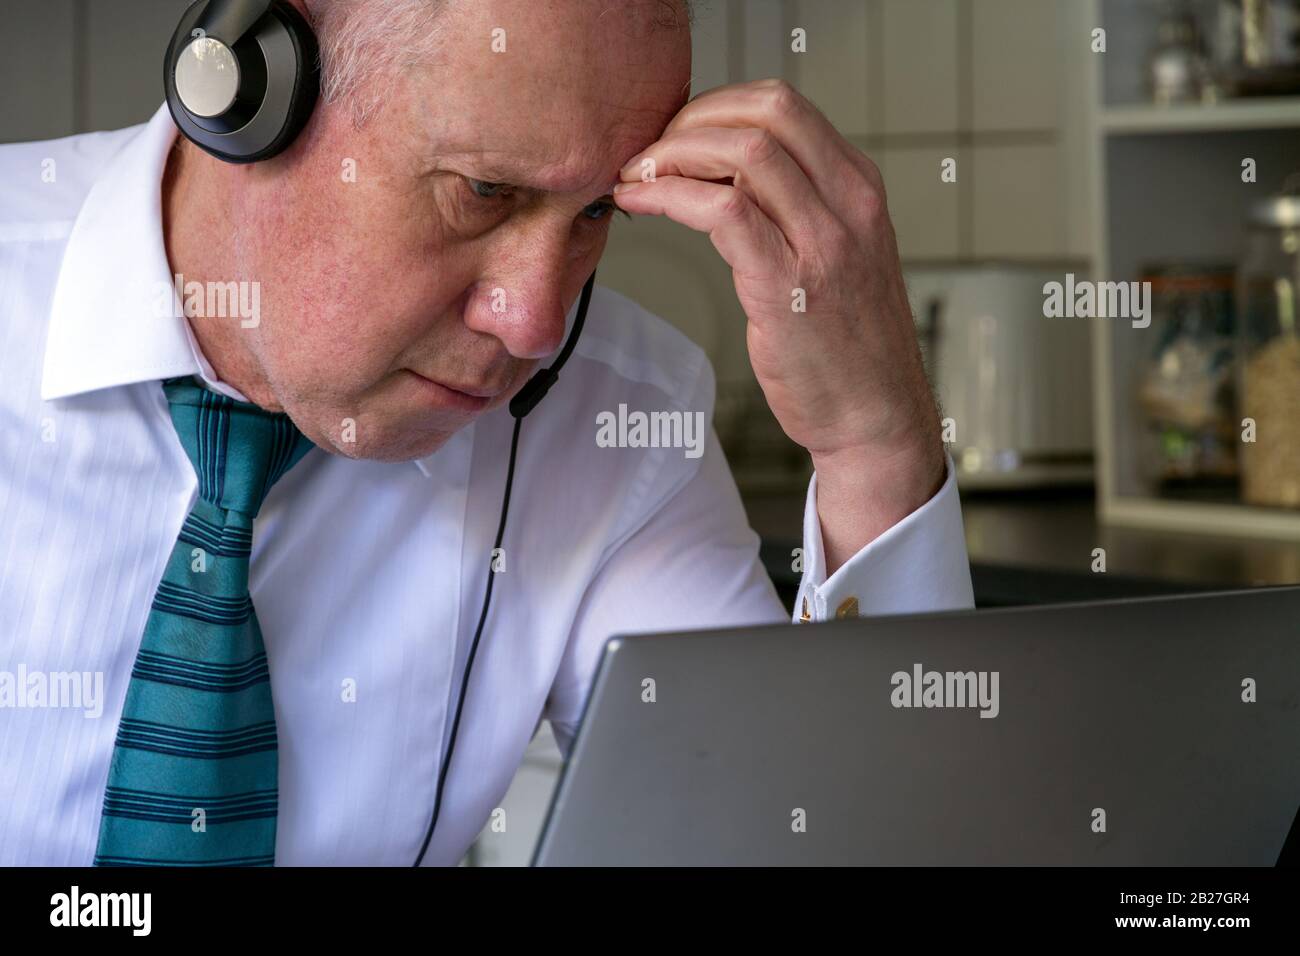 An older man in white shirt and tie wearing headphones looking frustrated and staring at laptop with evidence of working from kitchen in the backgound Stock Photo